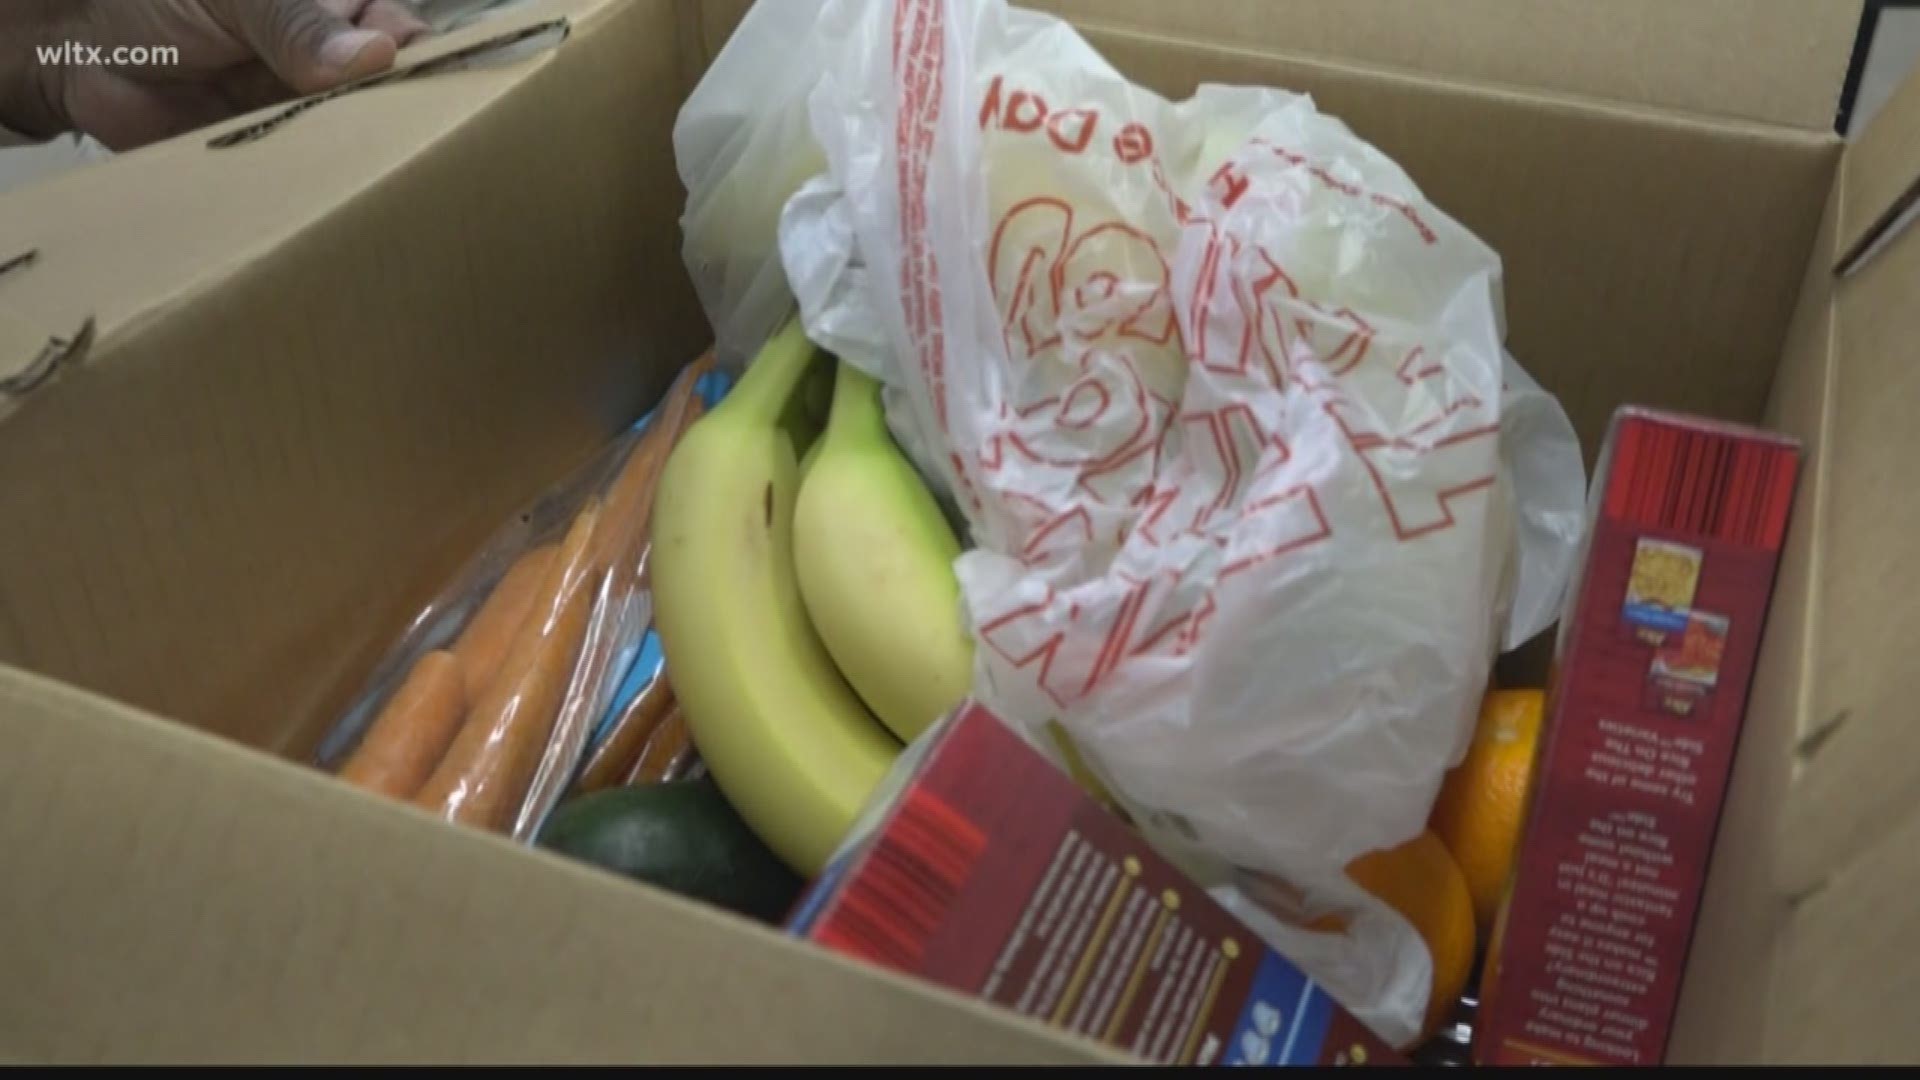 AARP and FoodShare teamed Wednesday up to give the residents of Allen Benedict Court a box filled with food.